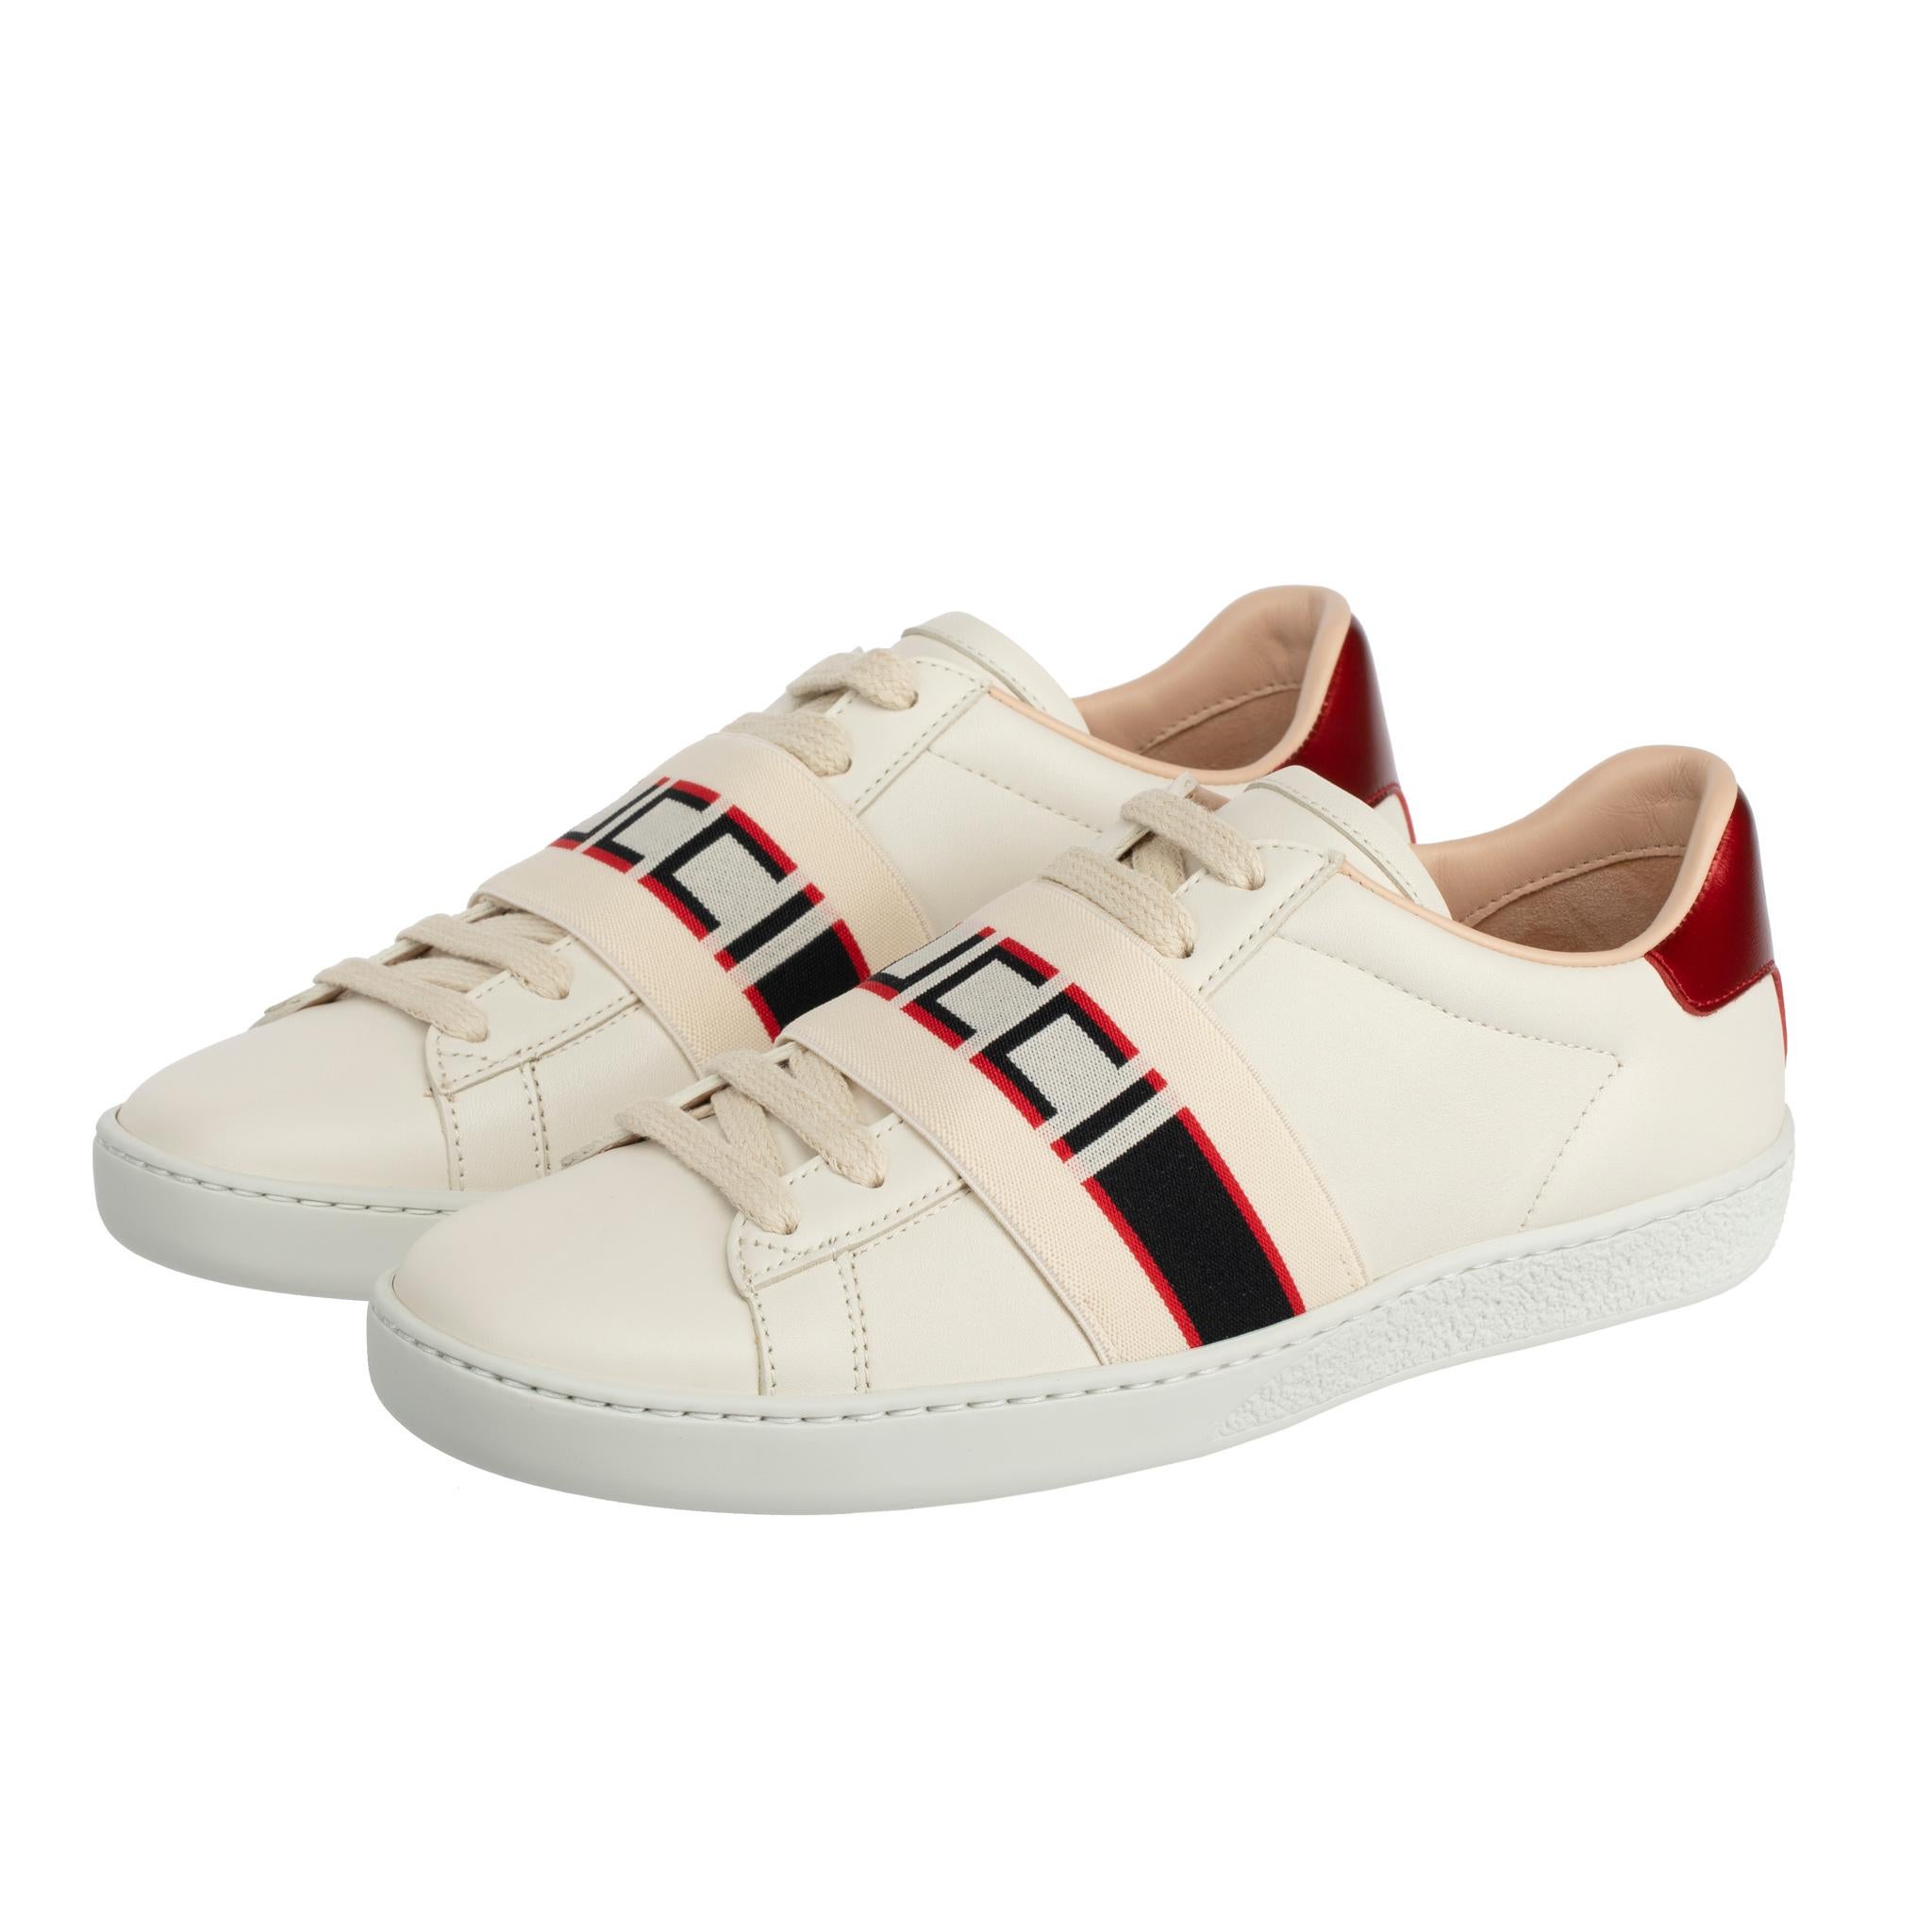 Gucci Ace Sneaker Off-White & Metallic Red 35.5 IT In New Condition For Sale In DOUBLE BAY, NSW